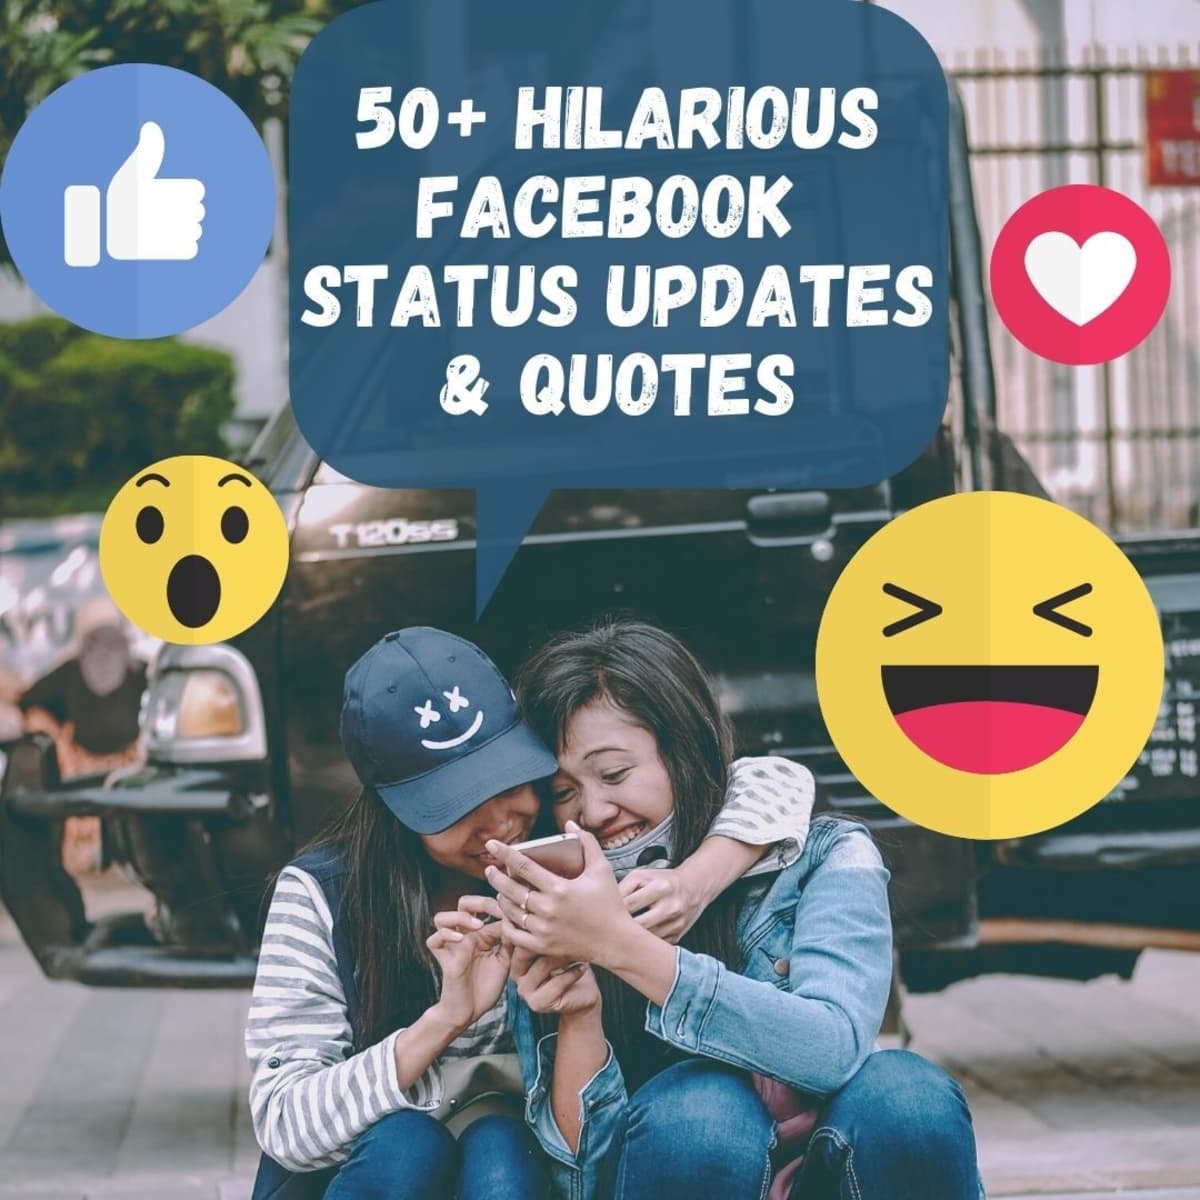 funny quotes and sayings for facebook status